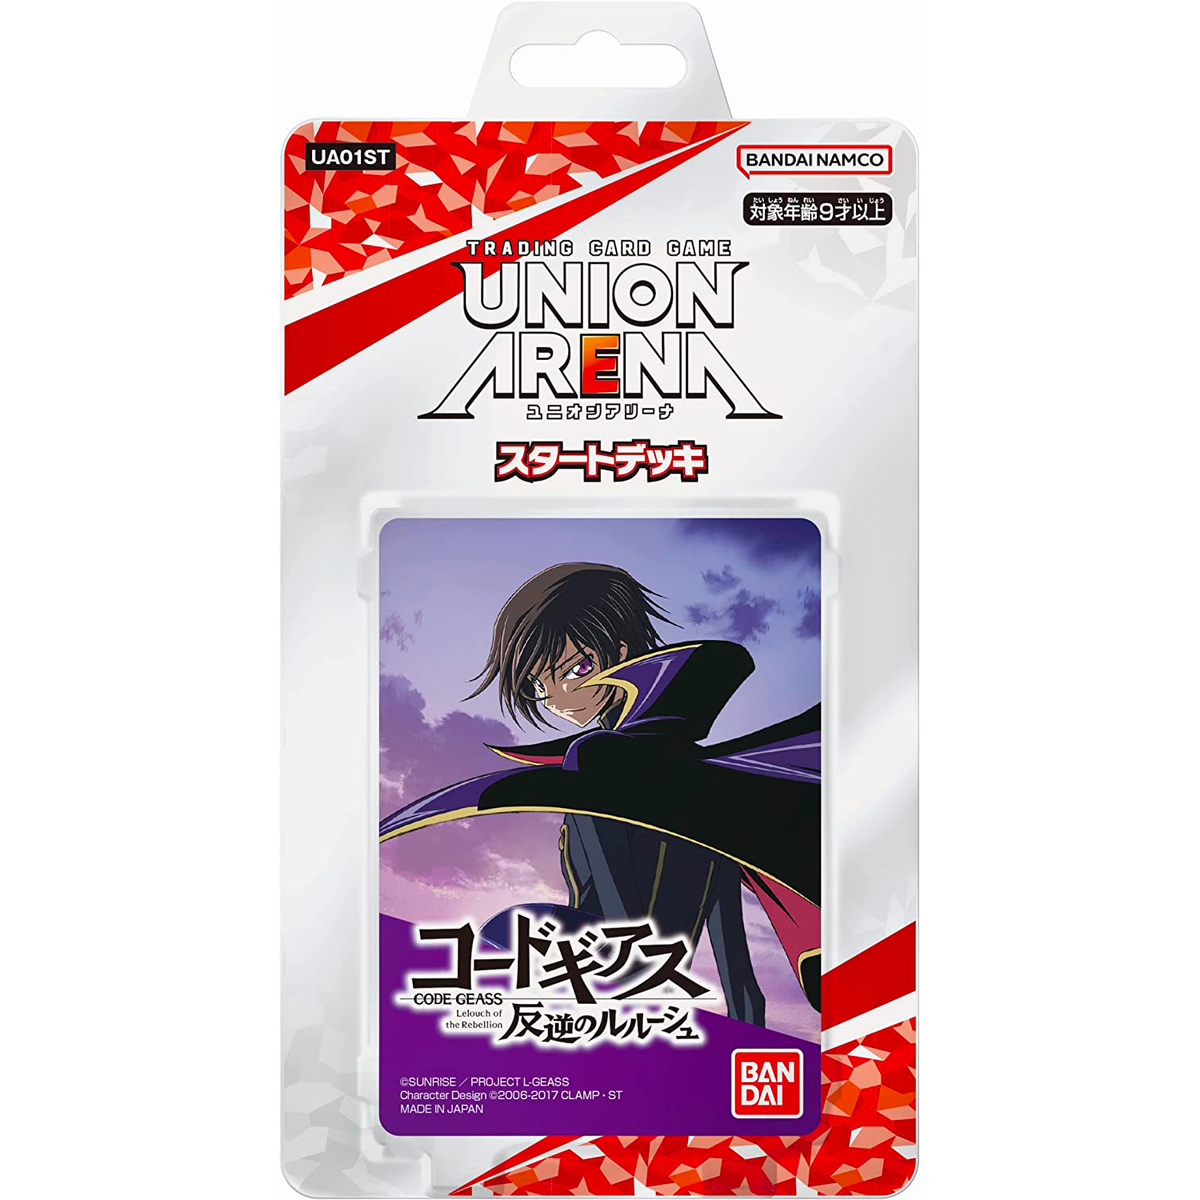 Union Arena TCG Starter Deck (Japanese)-Code Geass-Bandai Namco-Ace Cards & Collectibles